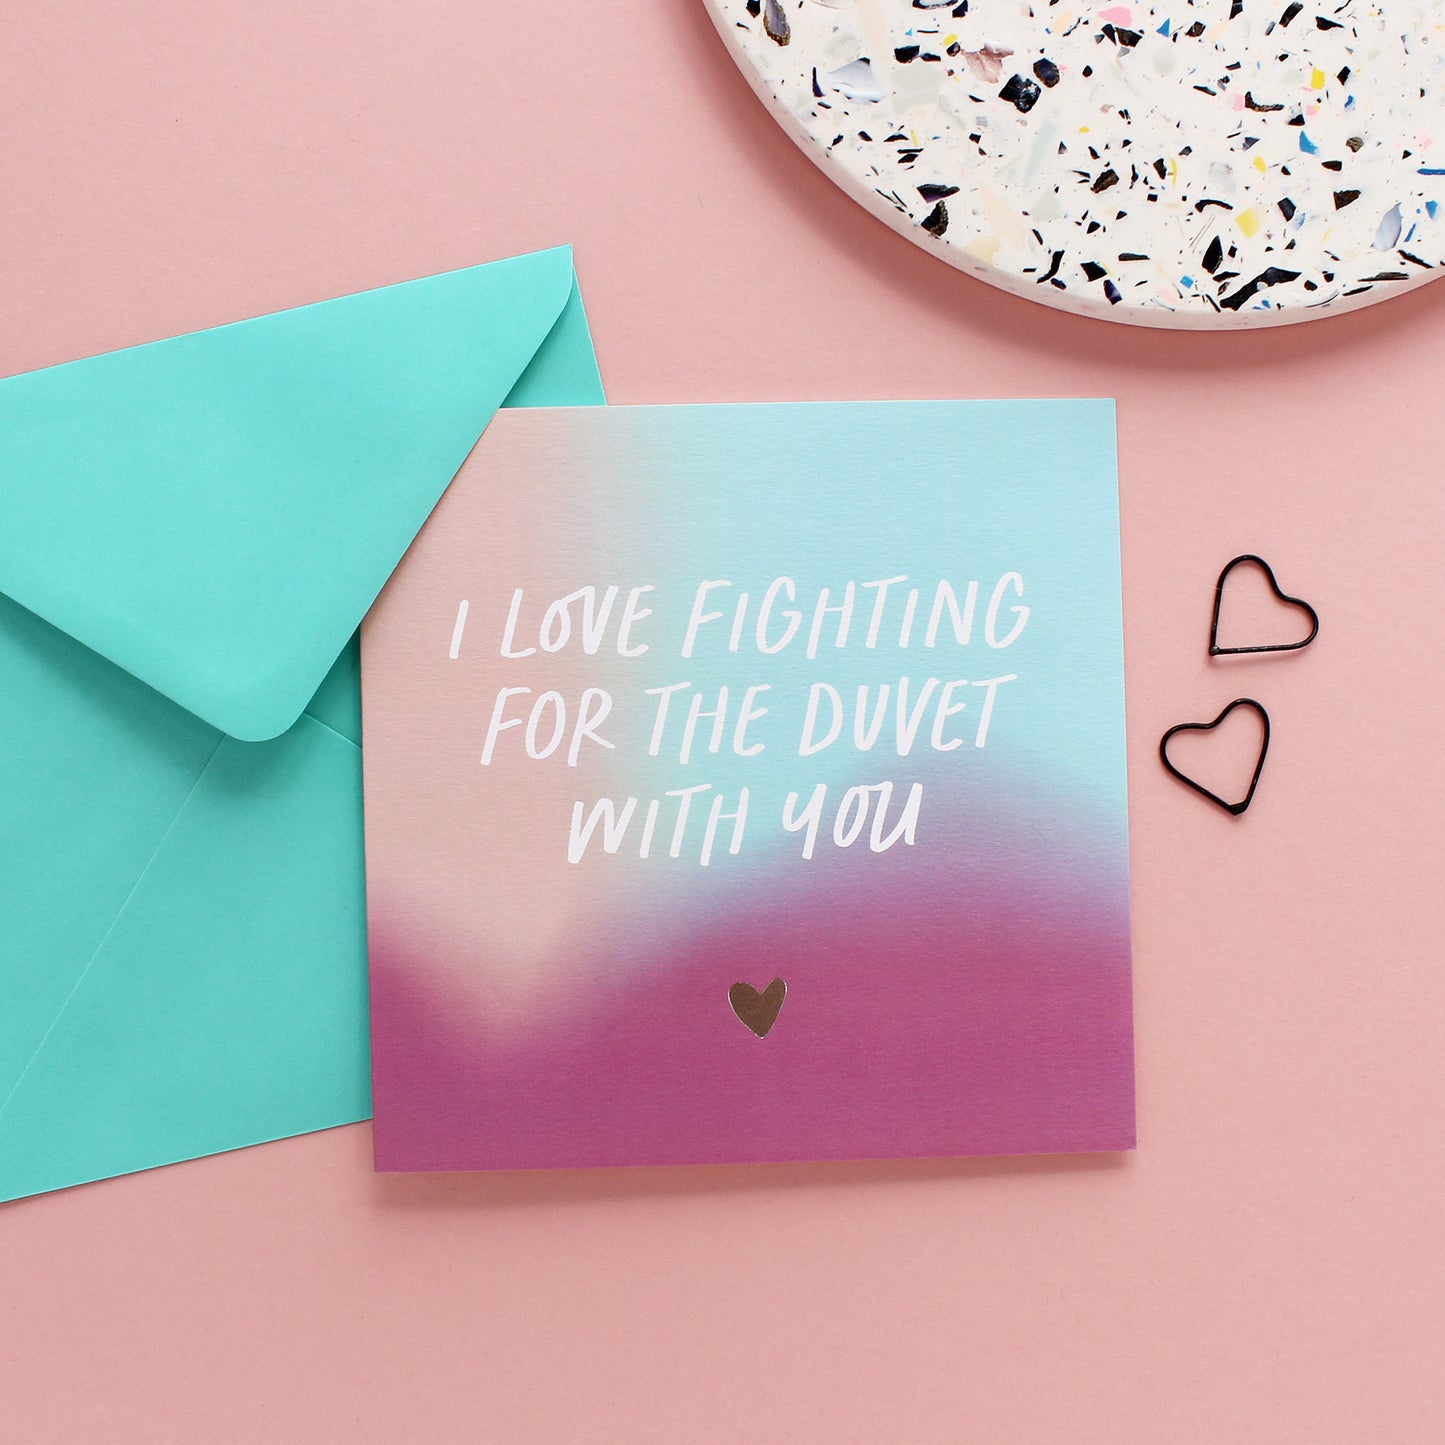 Love fighting for the duvet with you card